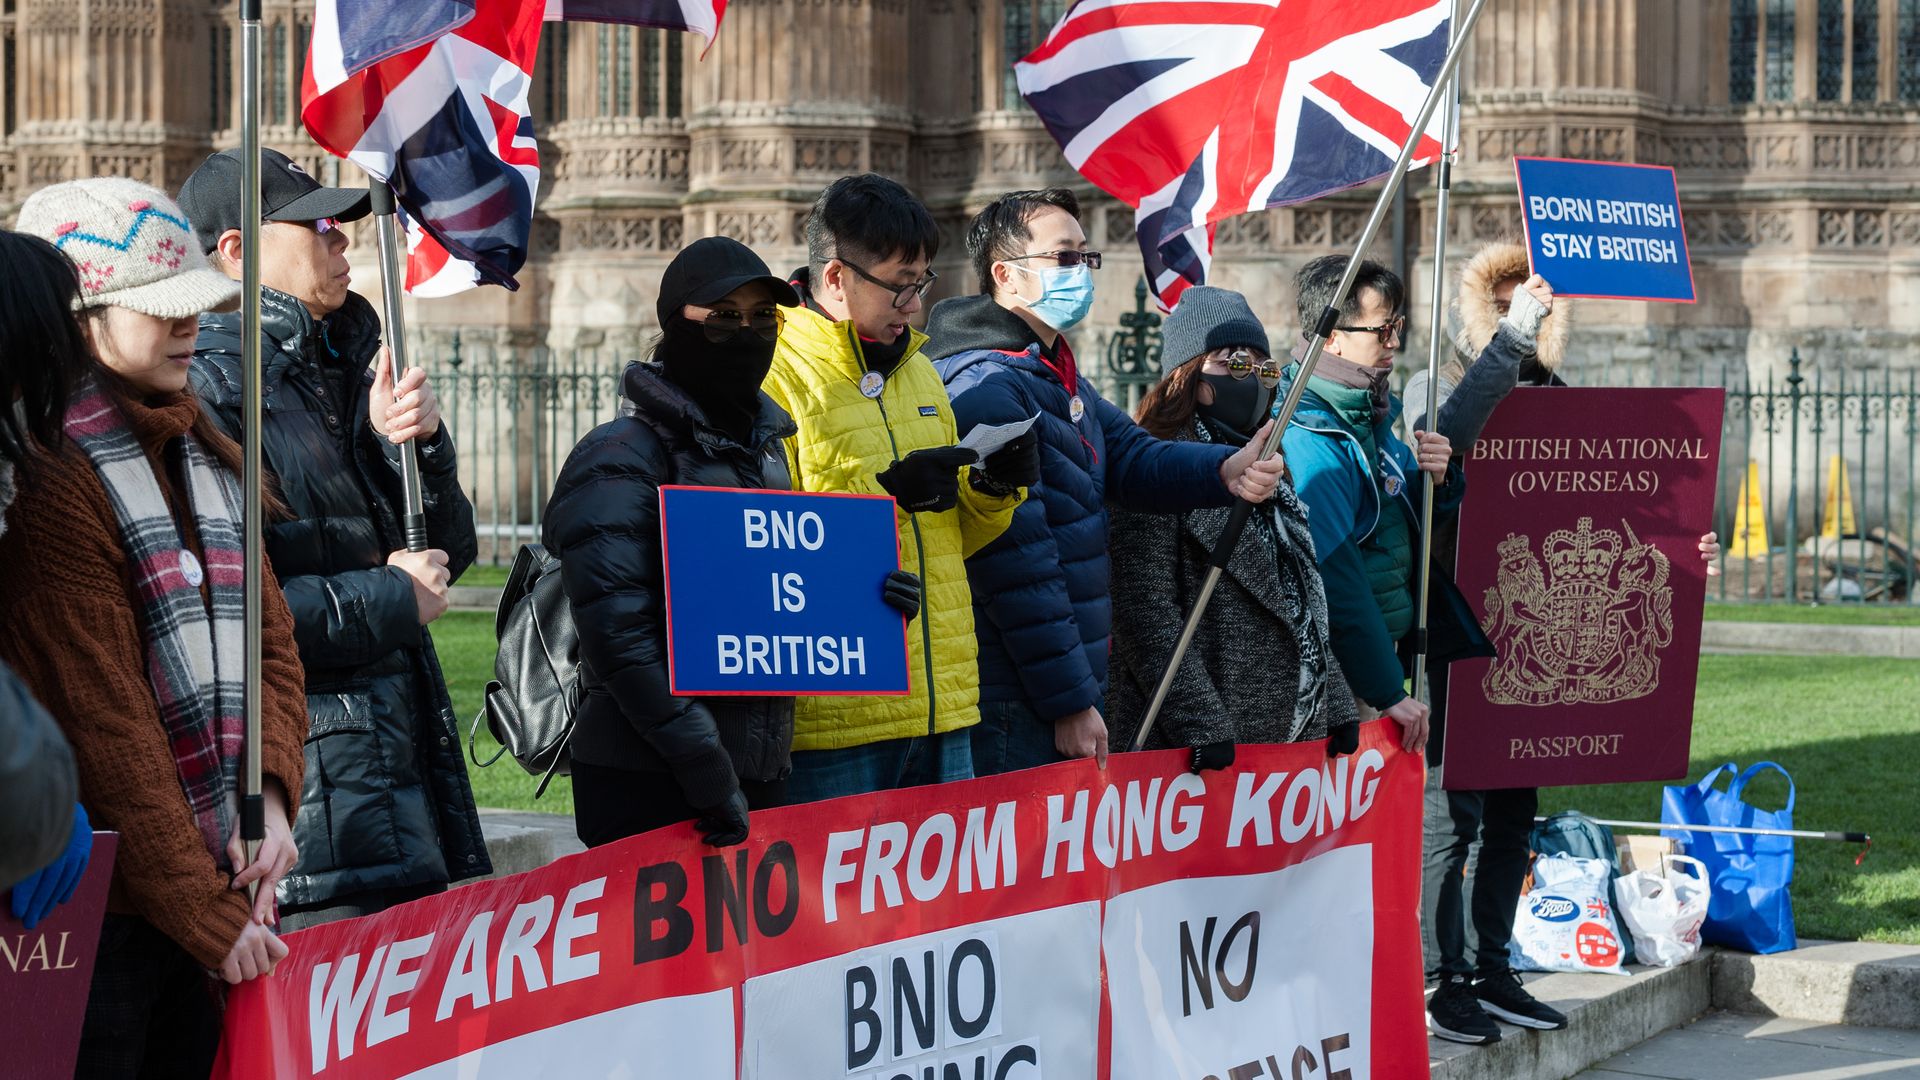 A group of Hong Kong citizens protest outside Houses of Parliament in London against the limited rights of British overseas passport holders in Hong Kong on 29 January